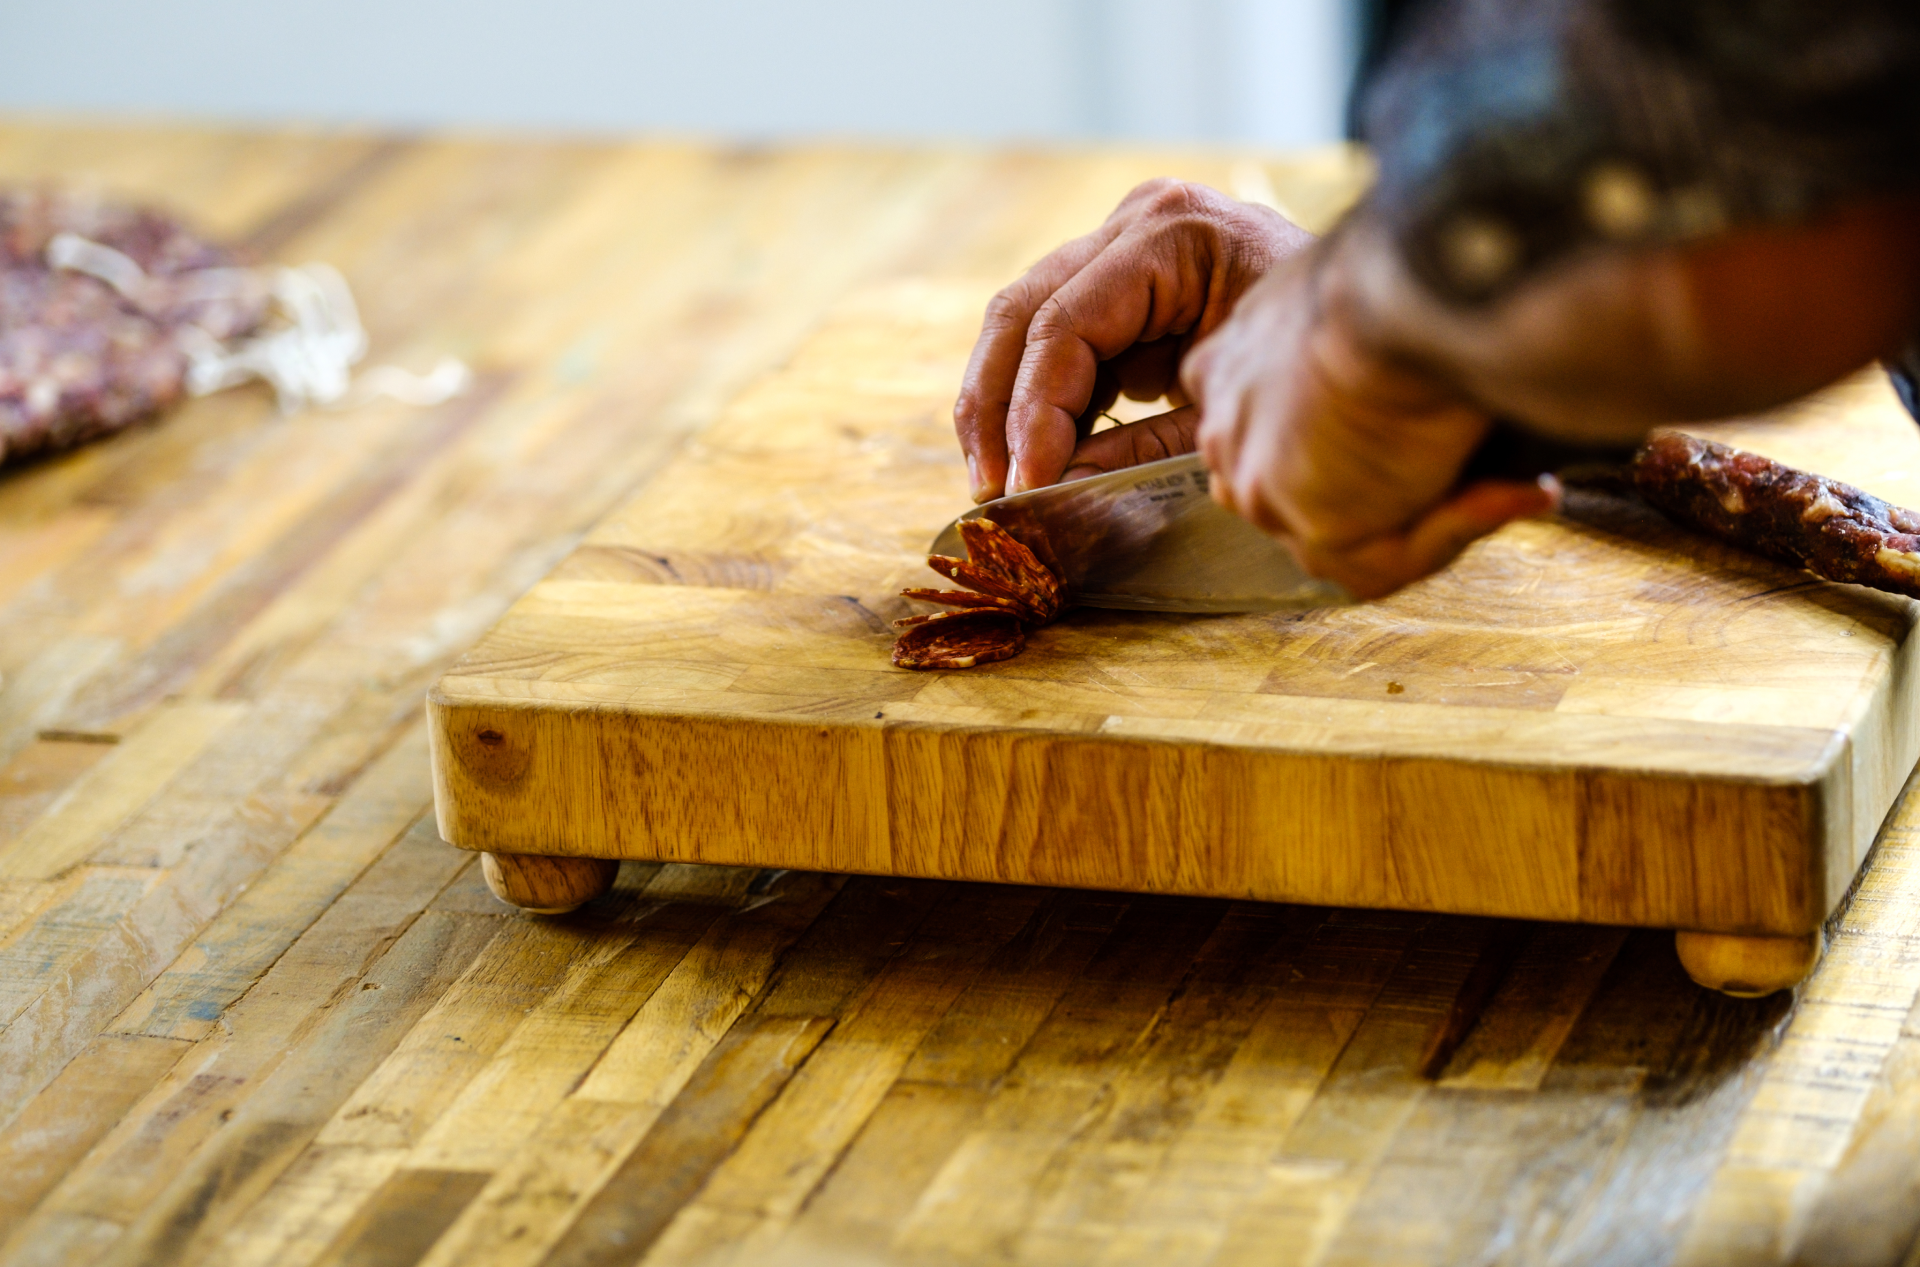 Salami being sliced on a wooden chopping board